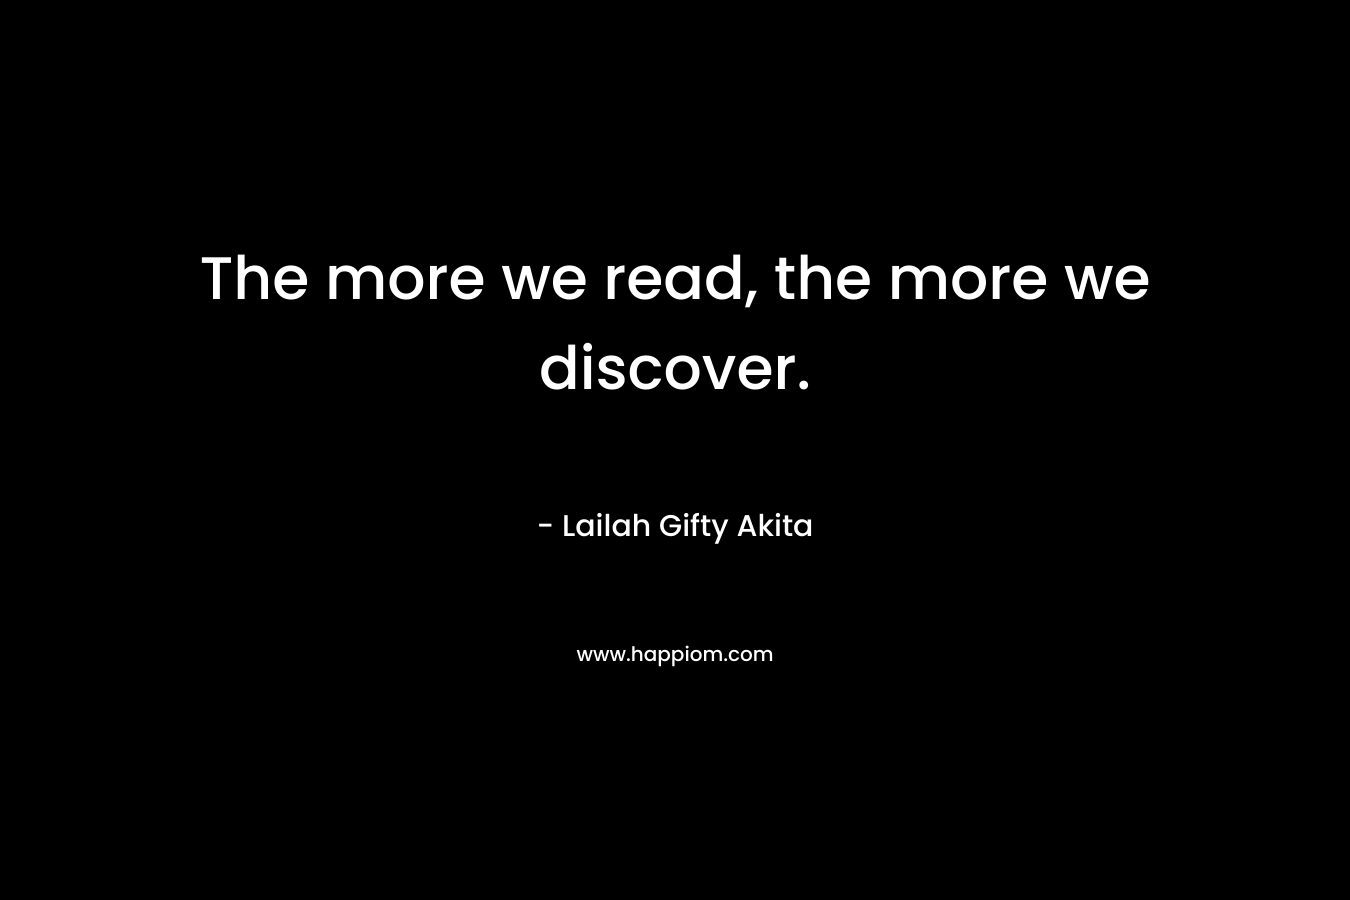 The more we read, the more we discover.